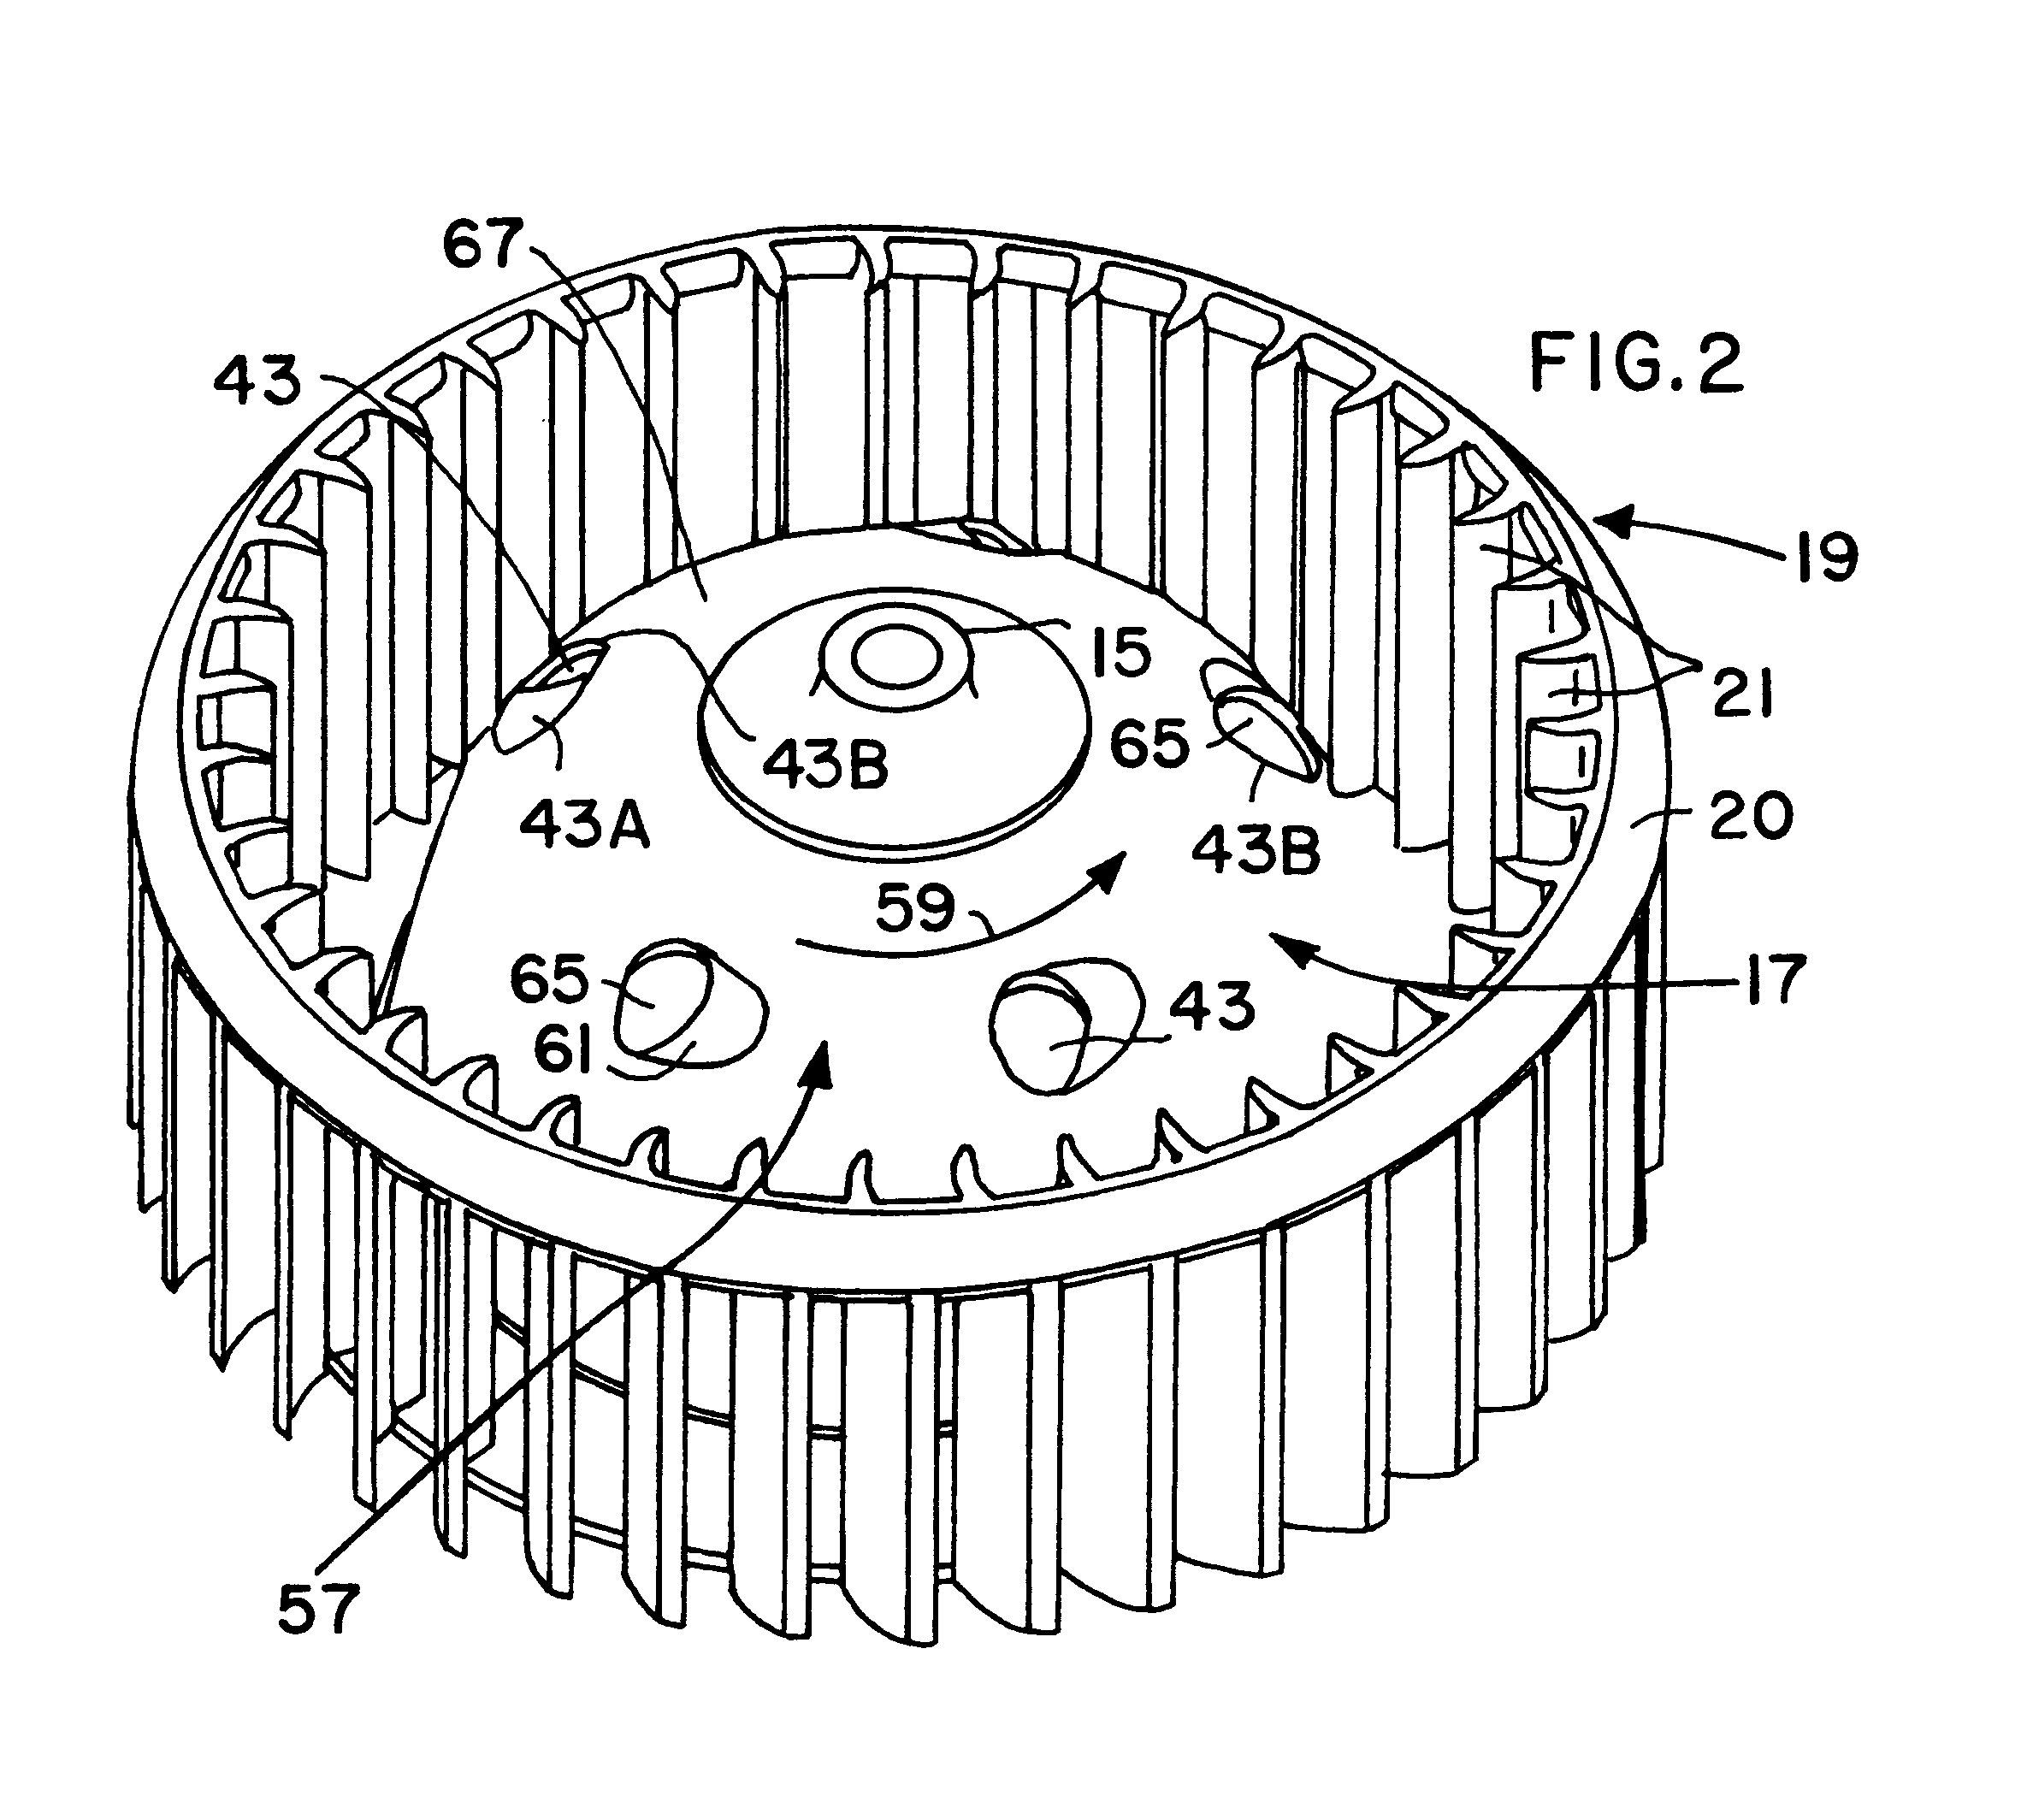 Radial blower, particularly for heating and air conditioning systems in automobiles